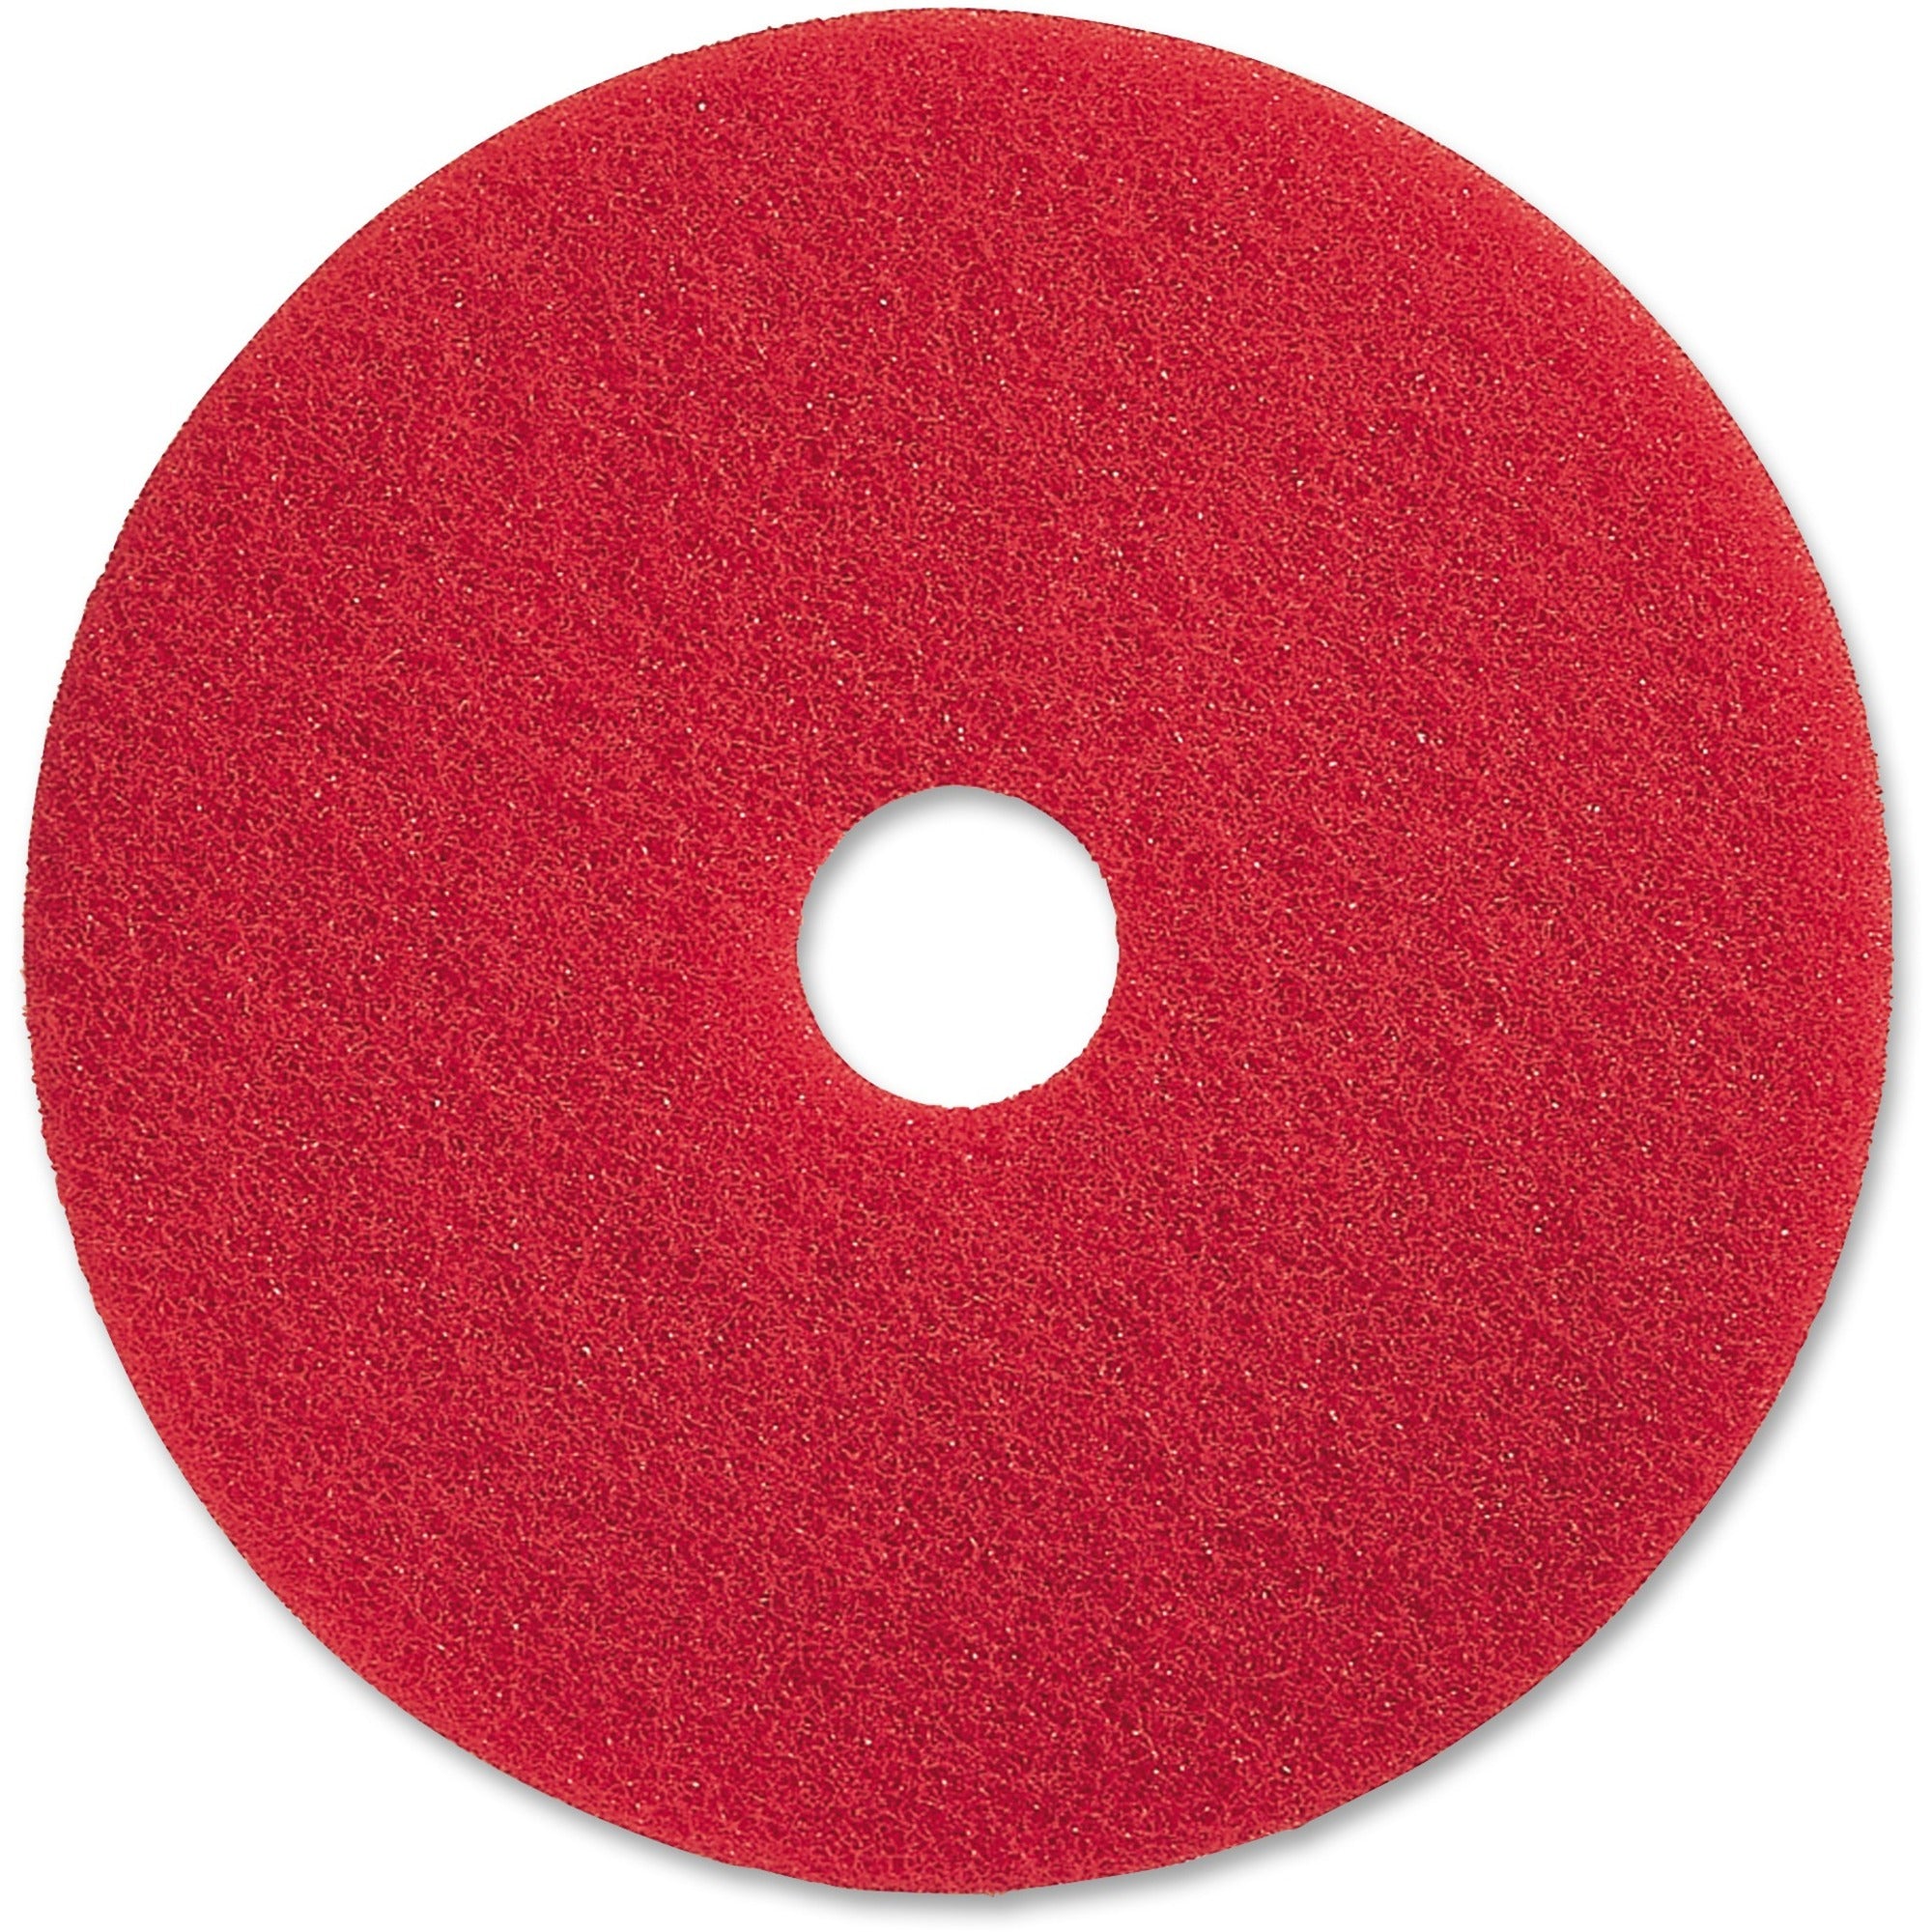 Genuine Joe Red Buffing Floor Pad - 17" Diameter - 5/Carton x 17" Diameter x 1" Thickness - Buffing, Scrubbing, Floor - 175 rpm to 350 rpm Speed Supported - Flexible, Resilient, Rotate, Dirt Remover - Fiber - Red - 